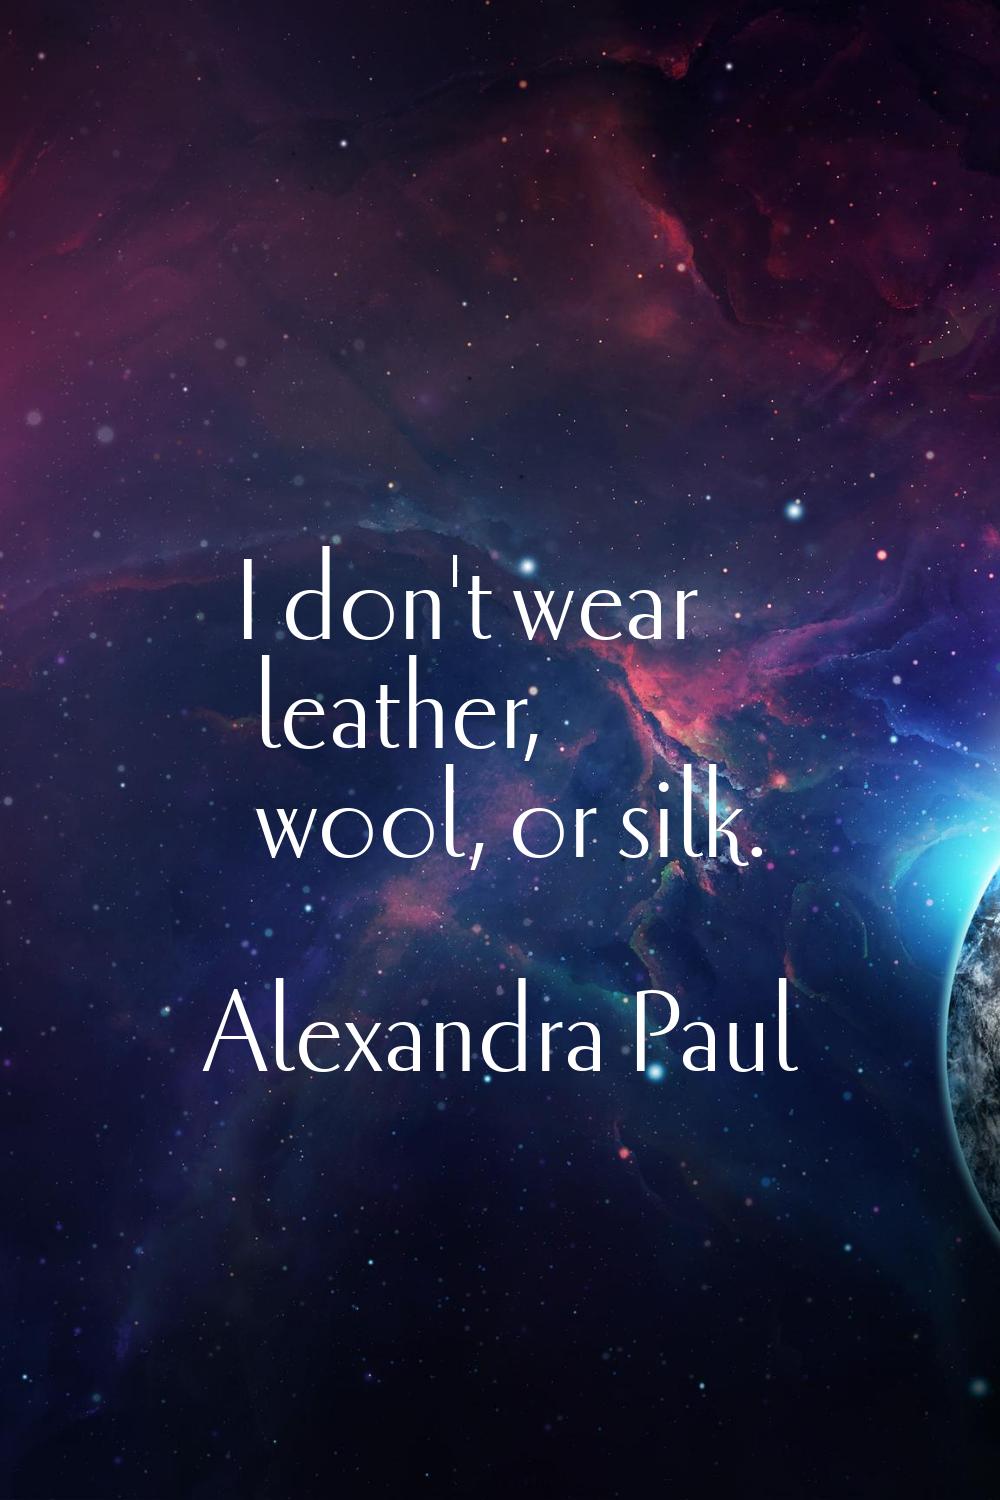 I don't wear leather, wool, or silk.